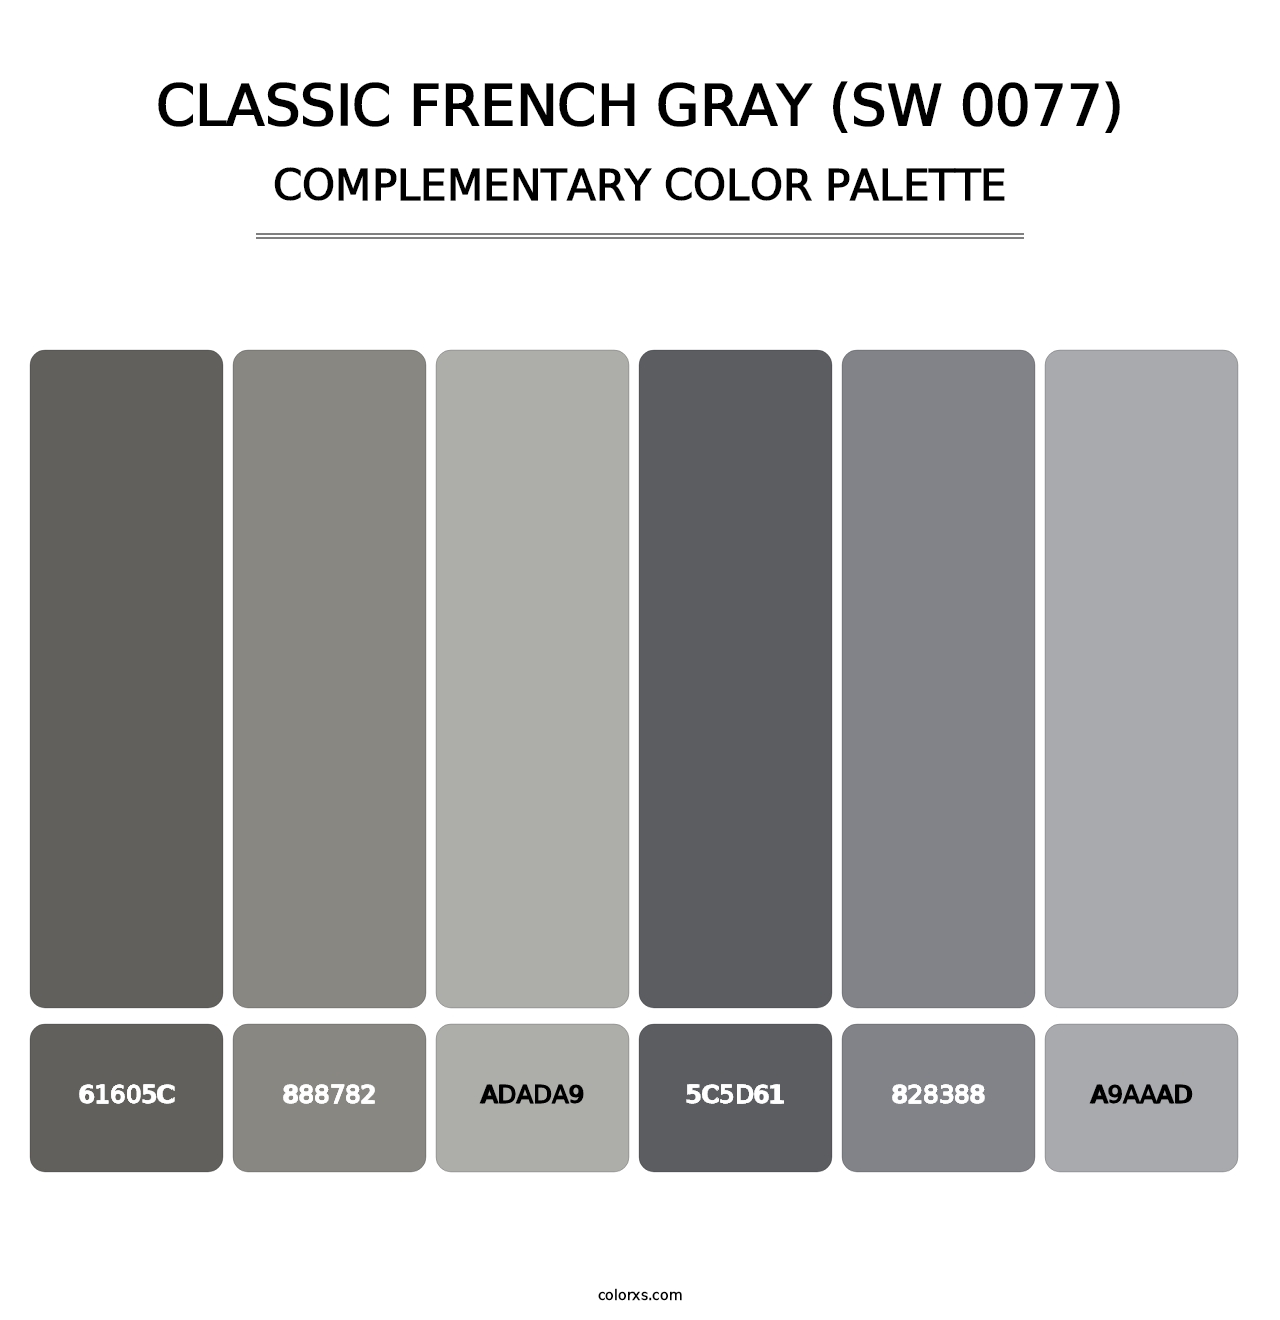 Classic French Gray (SW 0077) - Complementary Color Palette